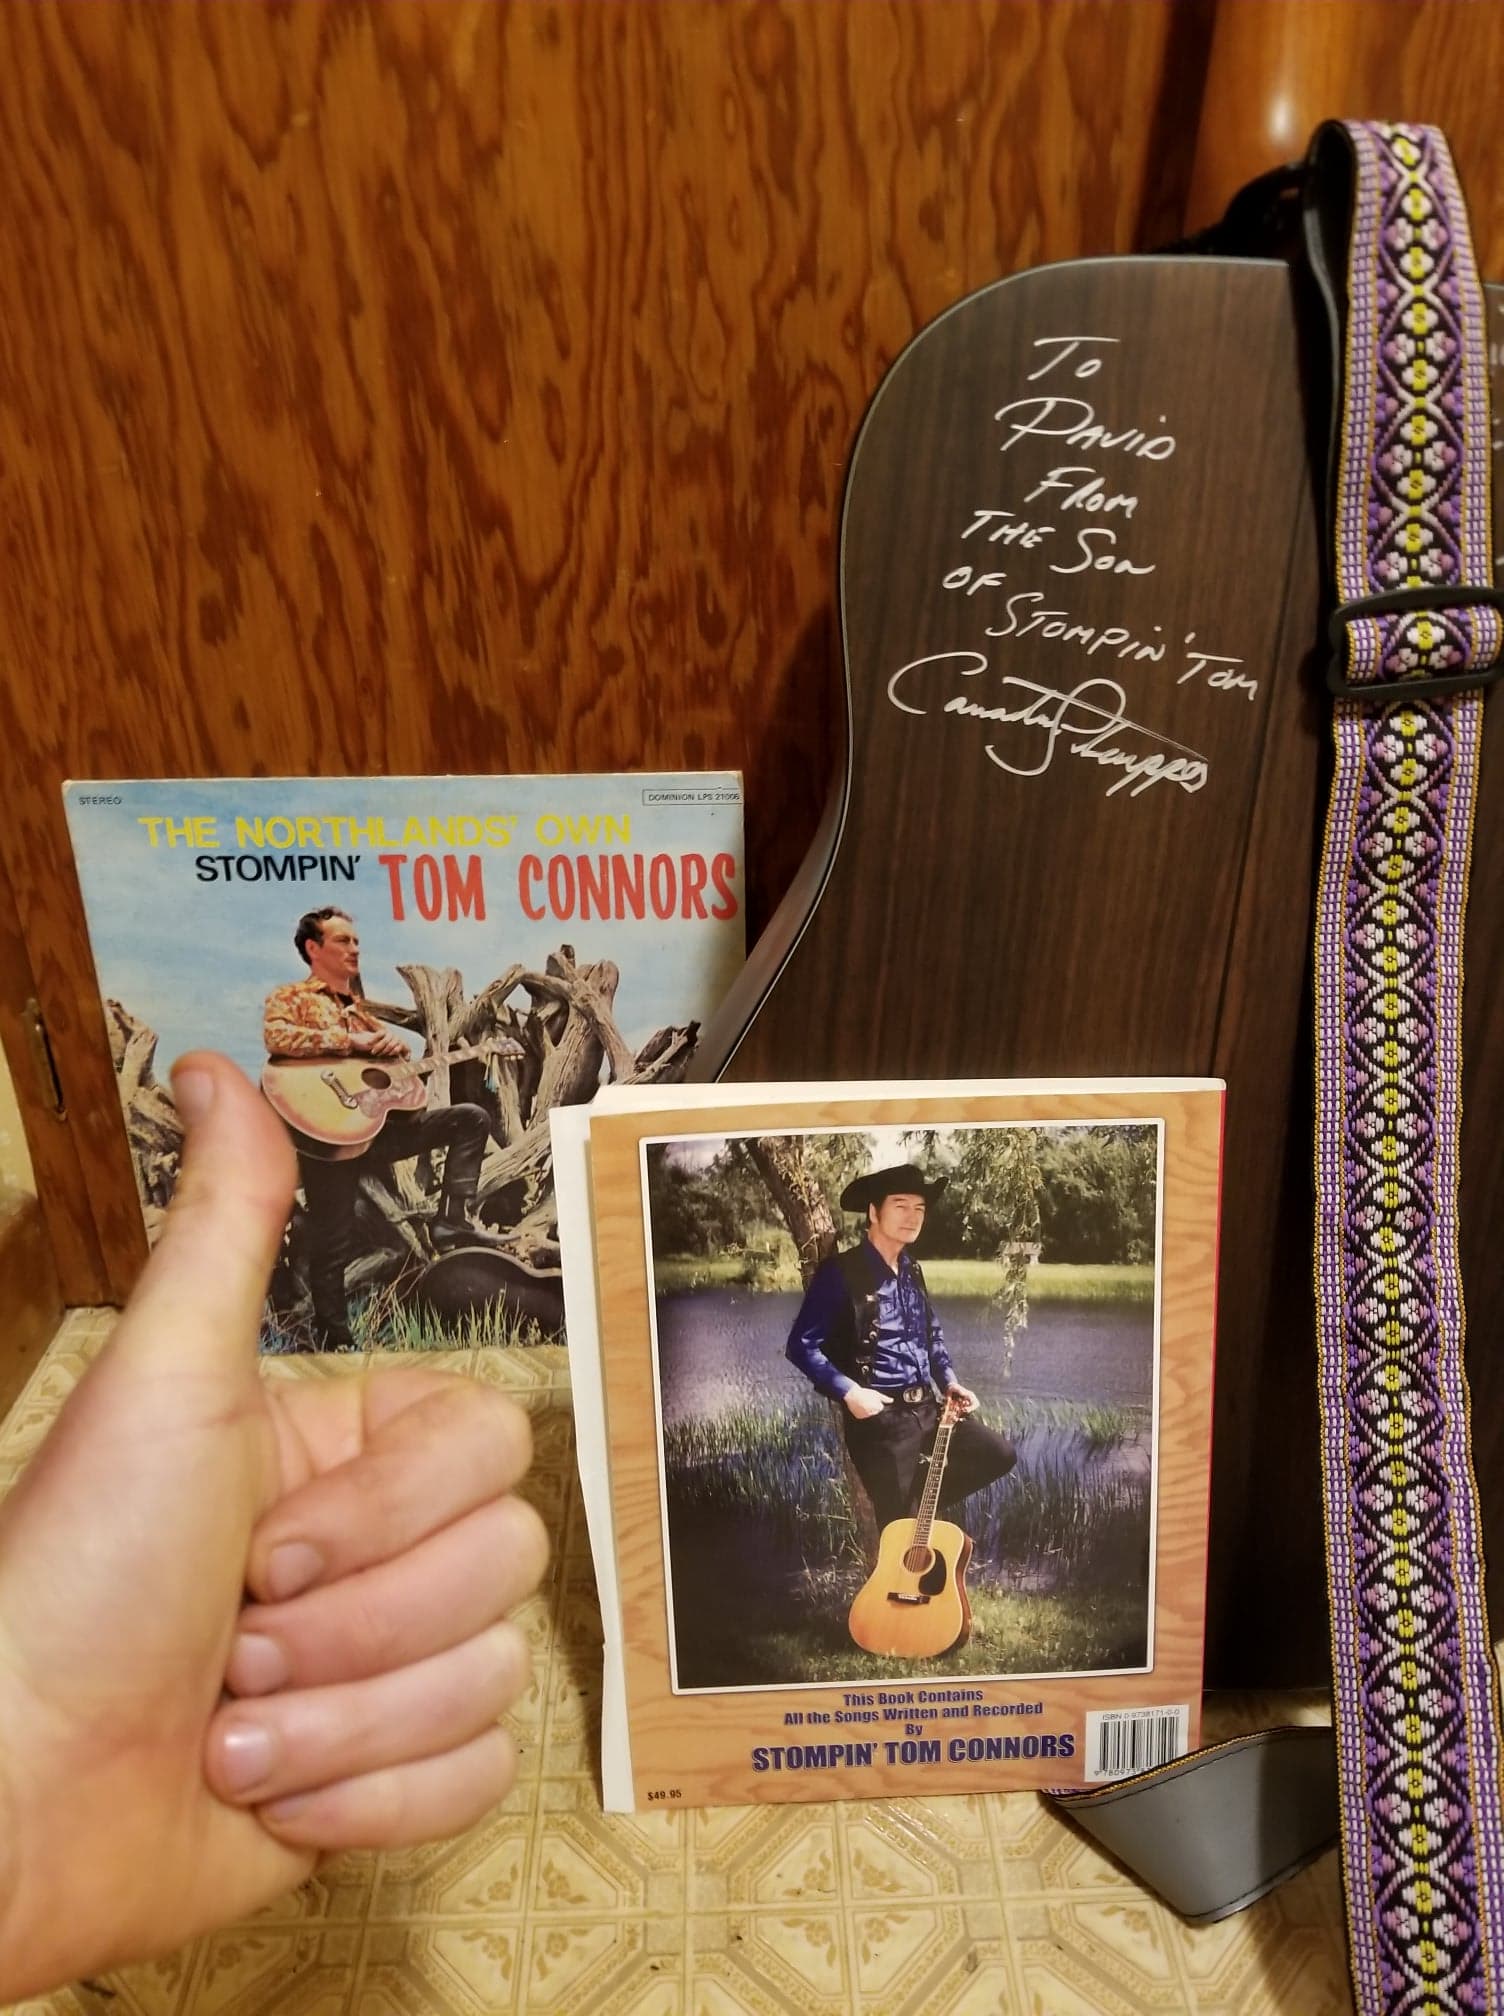 Stompin' Tom Connors (Son Taw Connors signed guitar!)